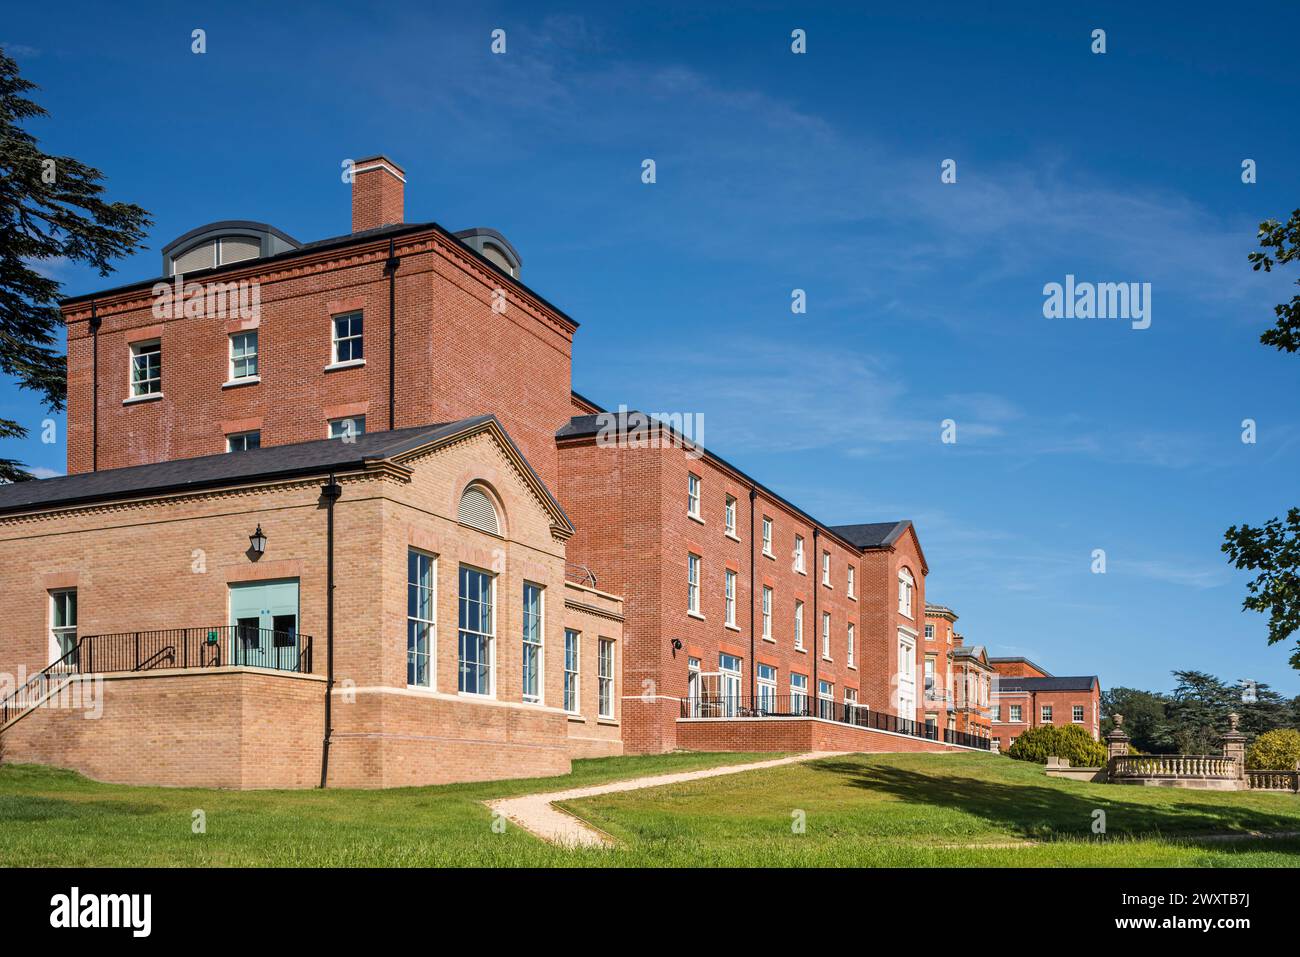 Defence and National Rehabilitation Centre (DNRC), Stanford on Soar, England. £300 million redevelopment project managed by Arup. Stock Photo